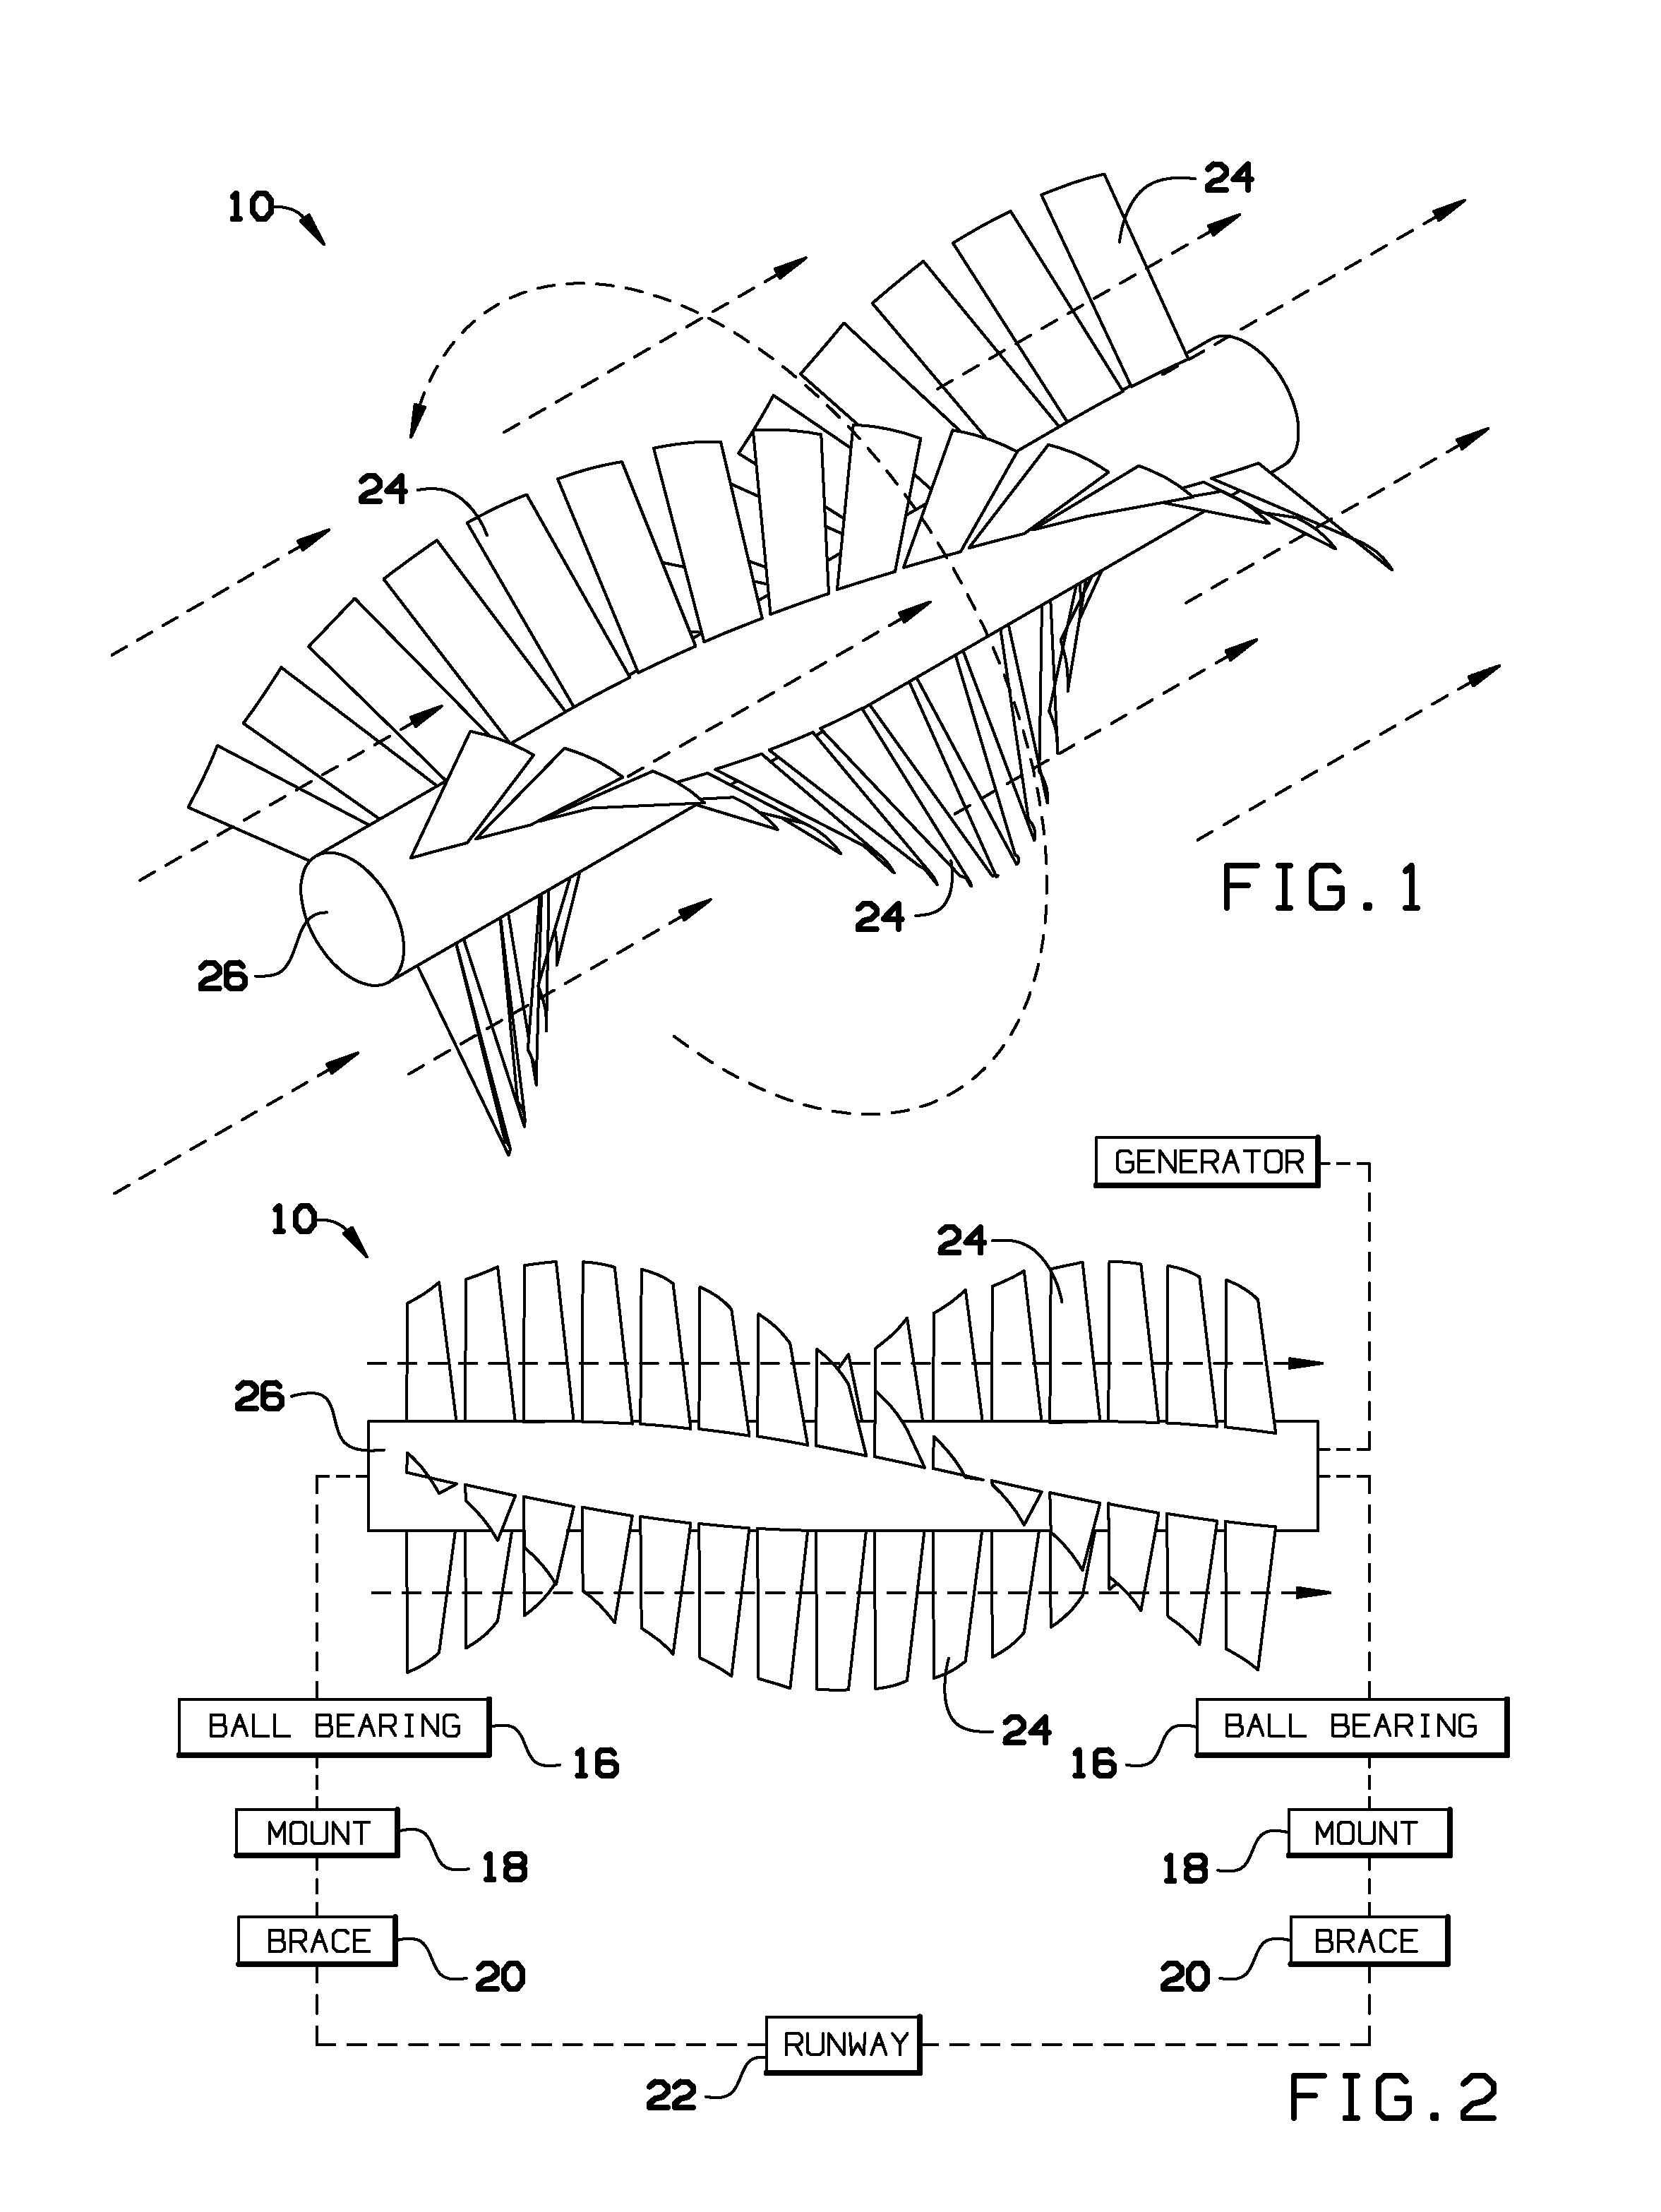 System for generating electrical power